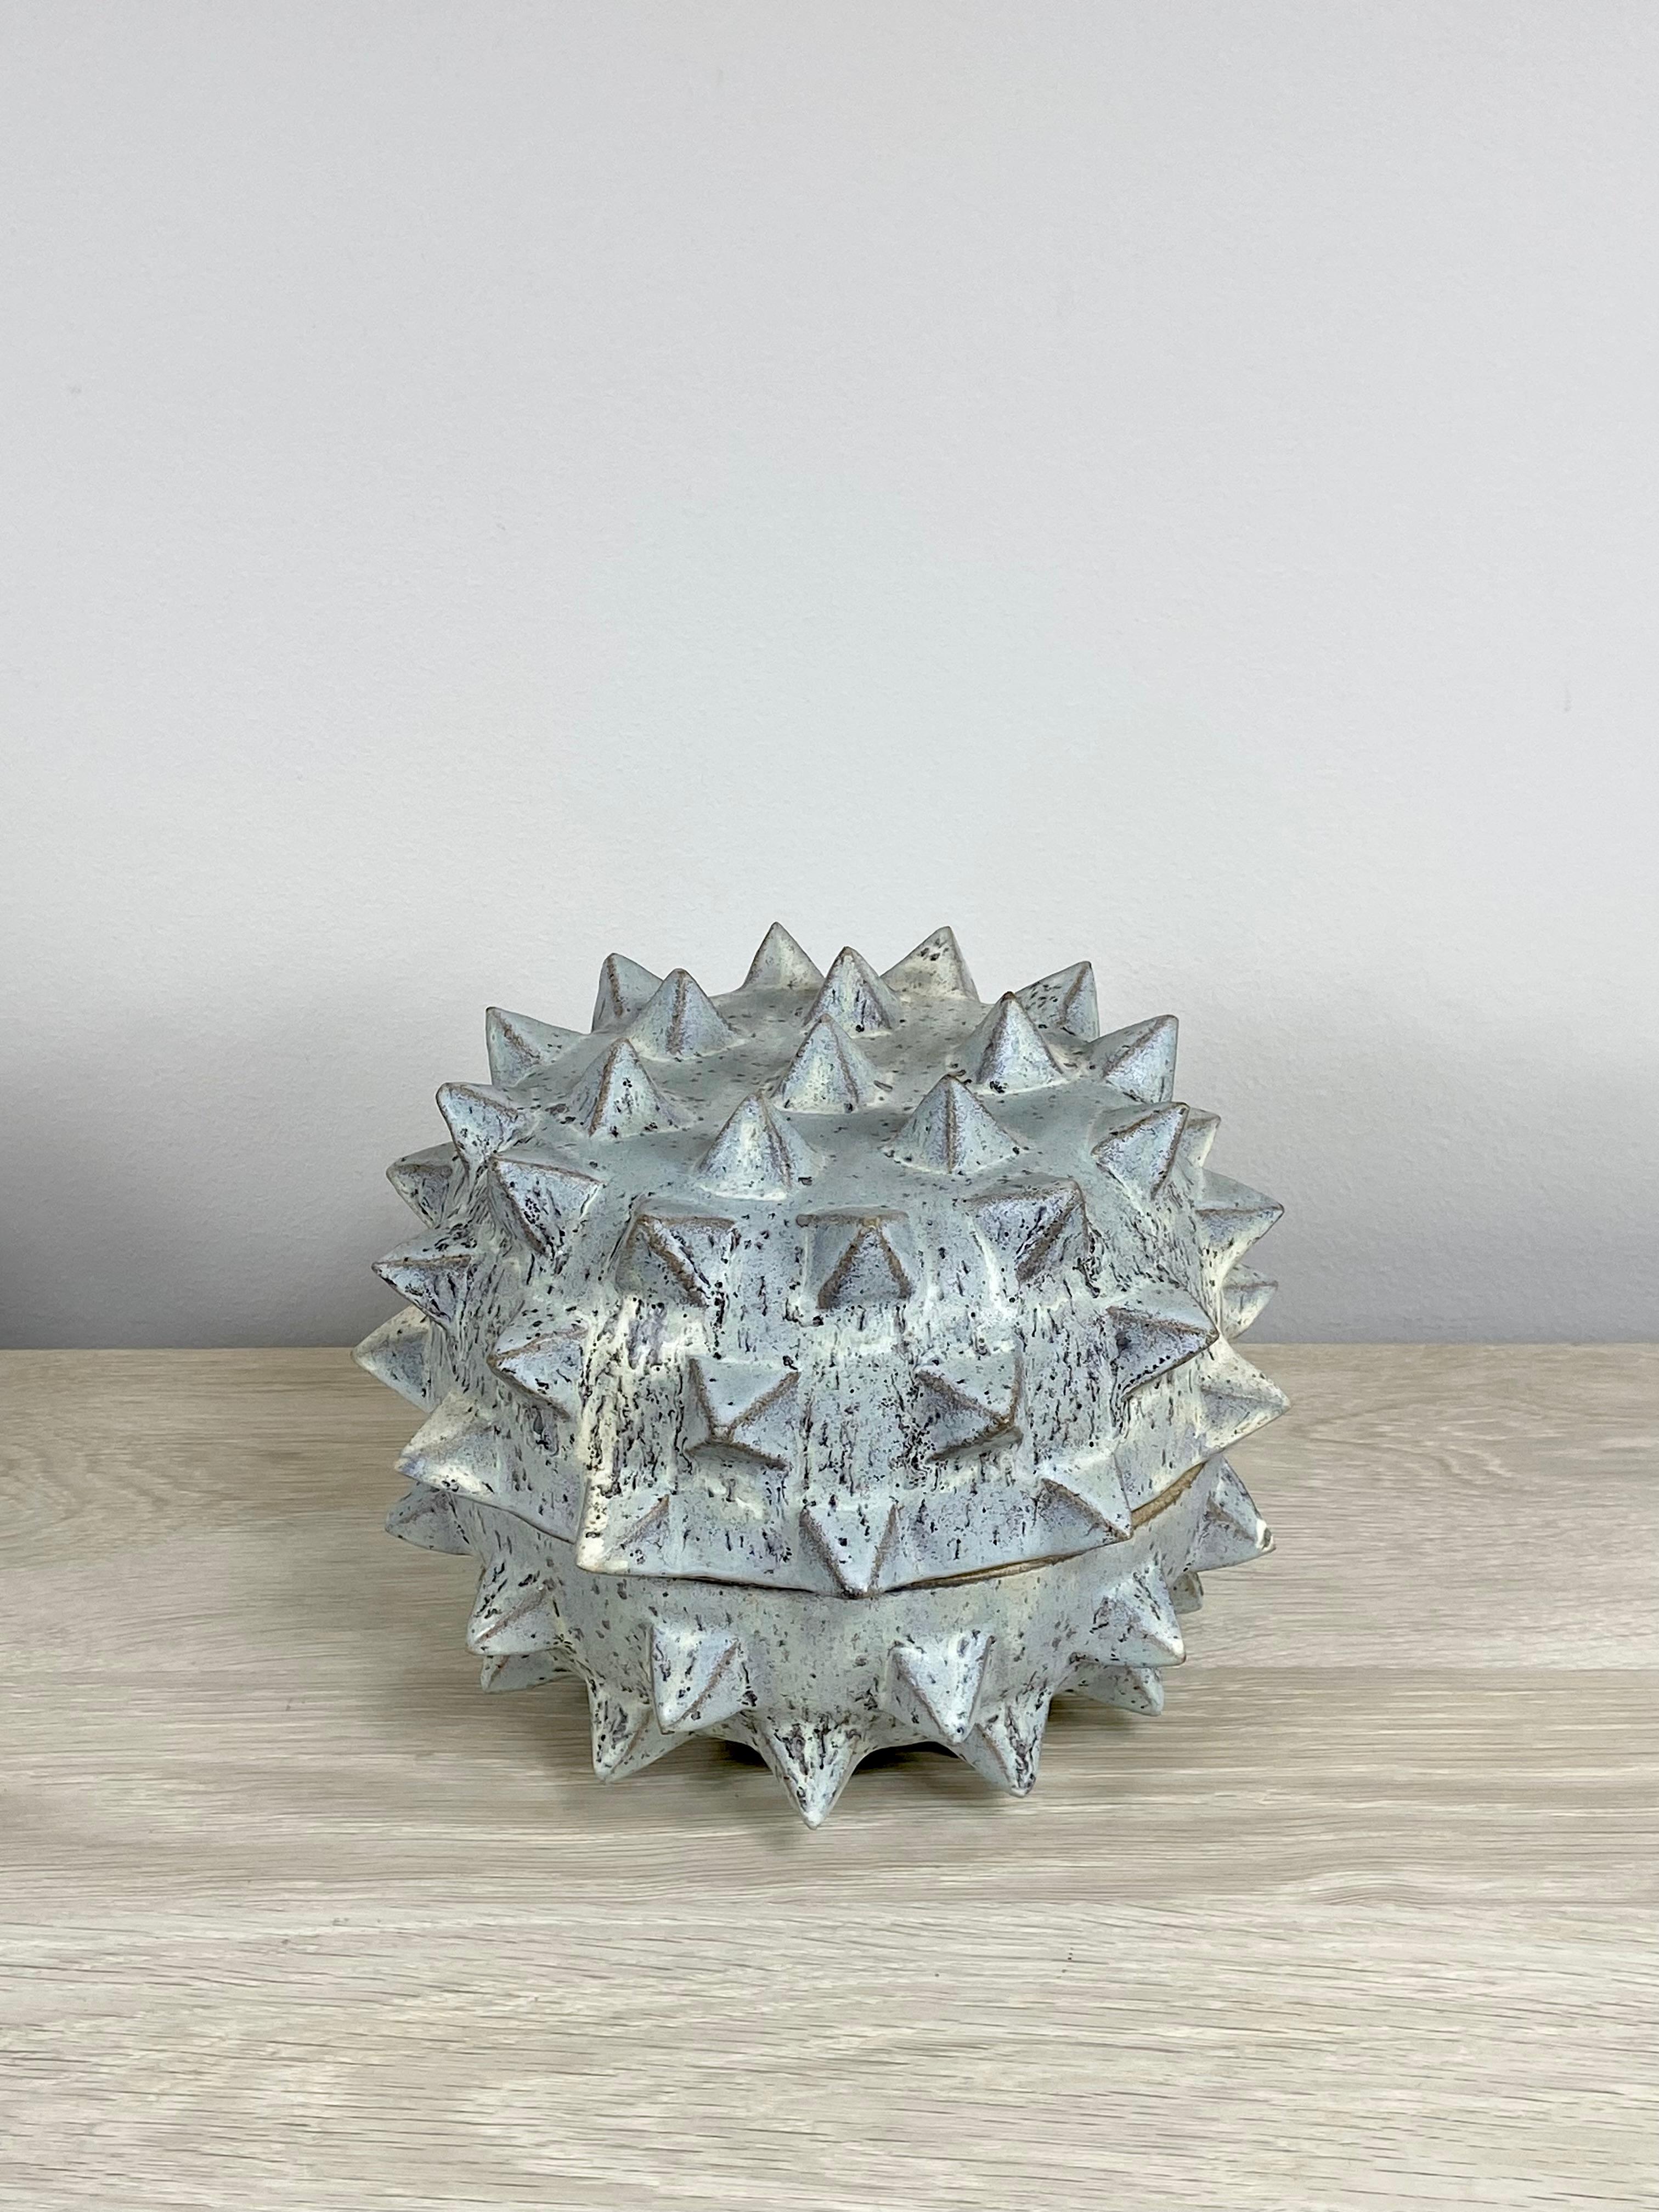 Contemporary Spiky Ceramic Vessel By LGS Studio For Sale